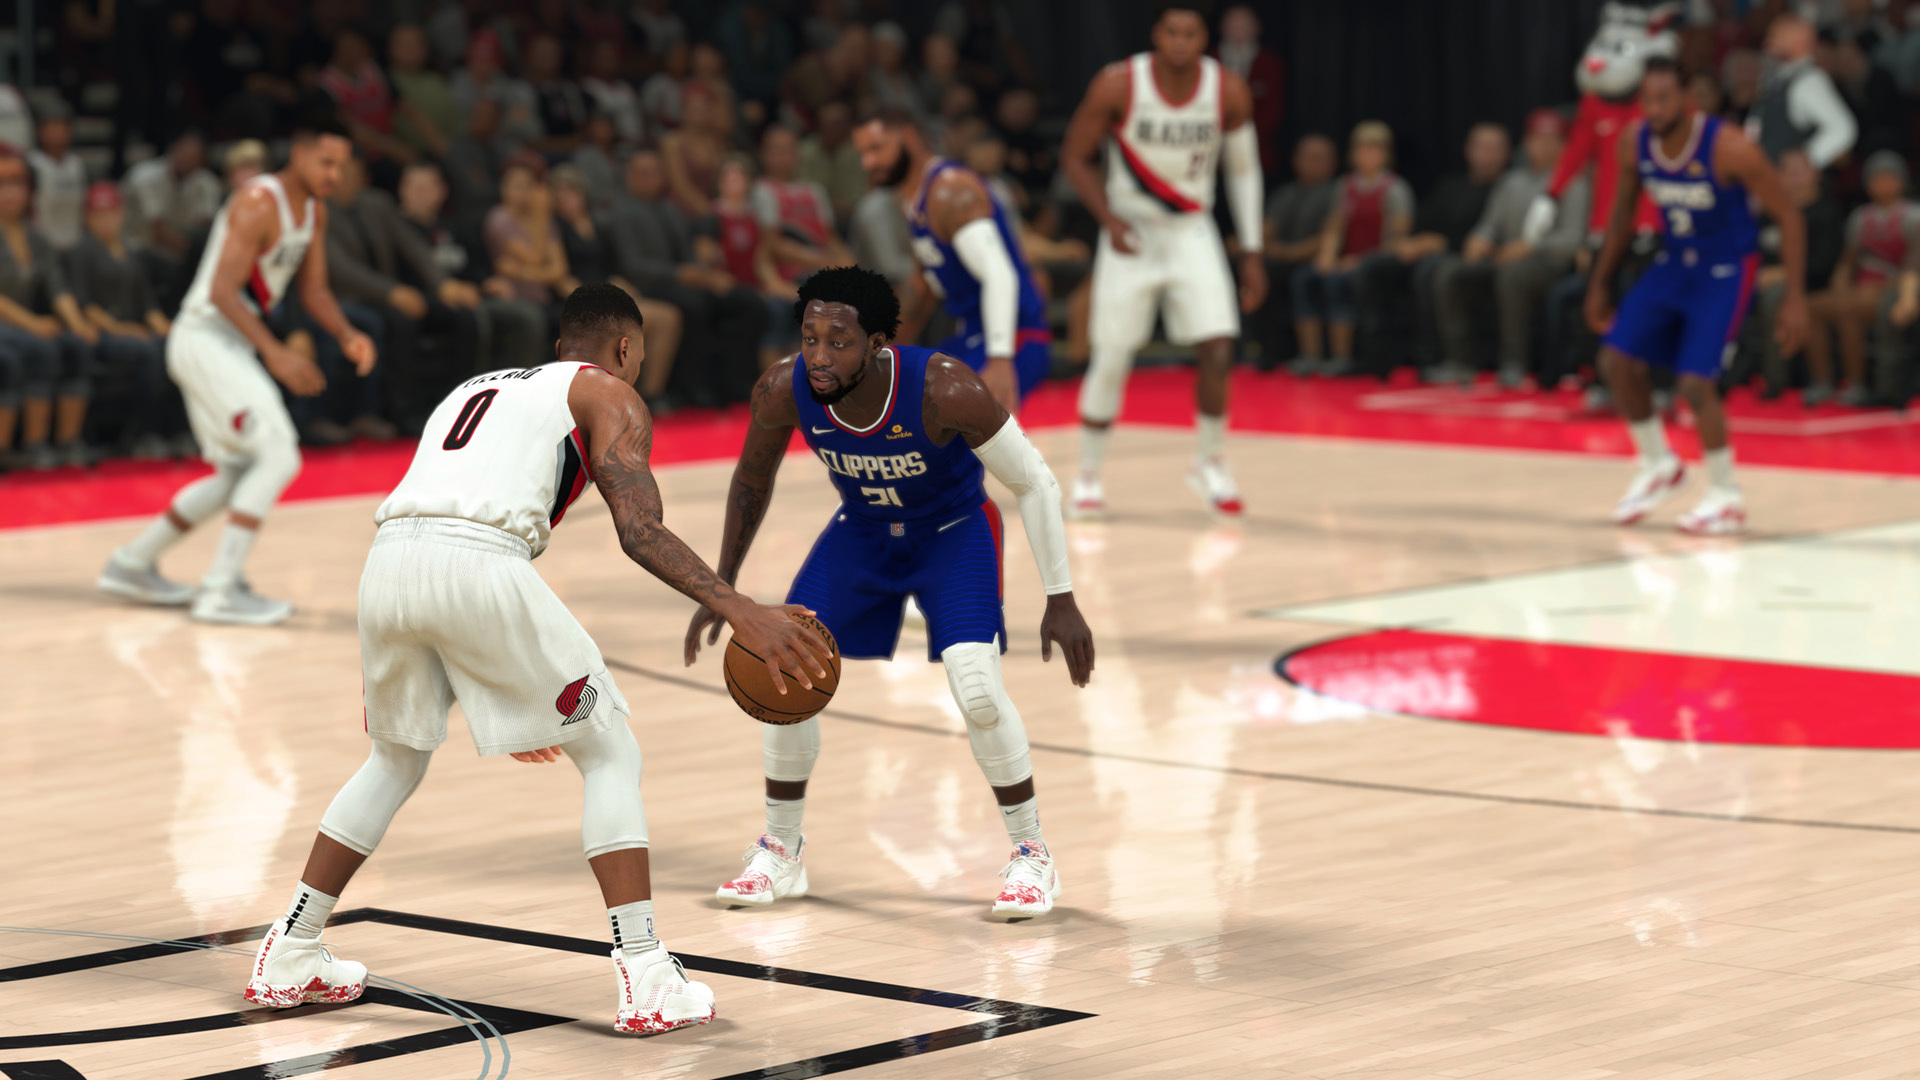 NBA 2K21 next-gen gameplay has now been officially revealed